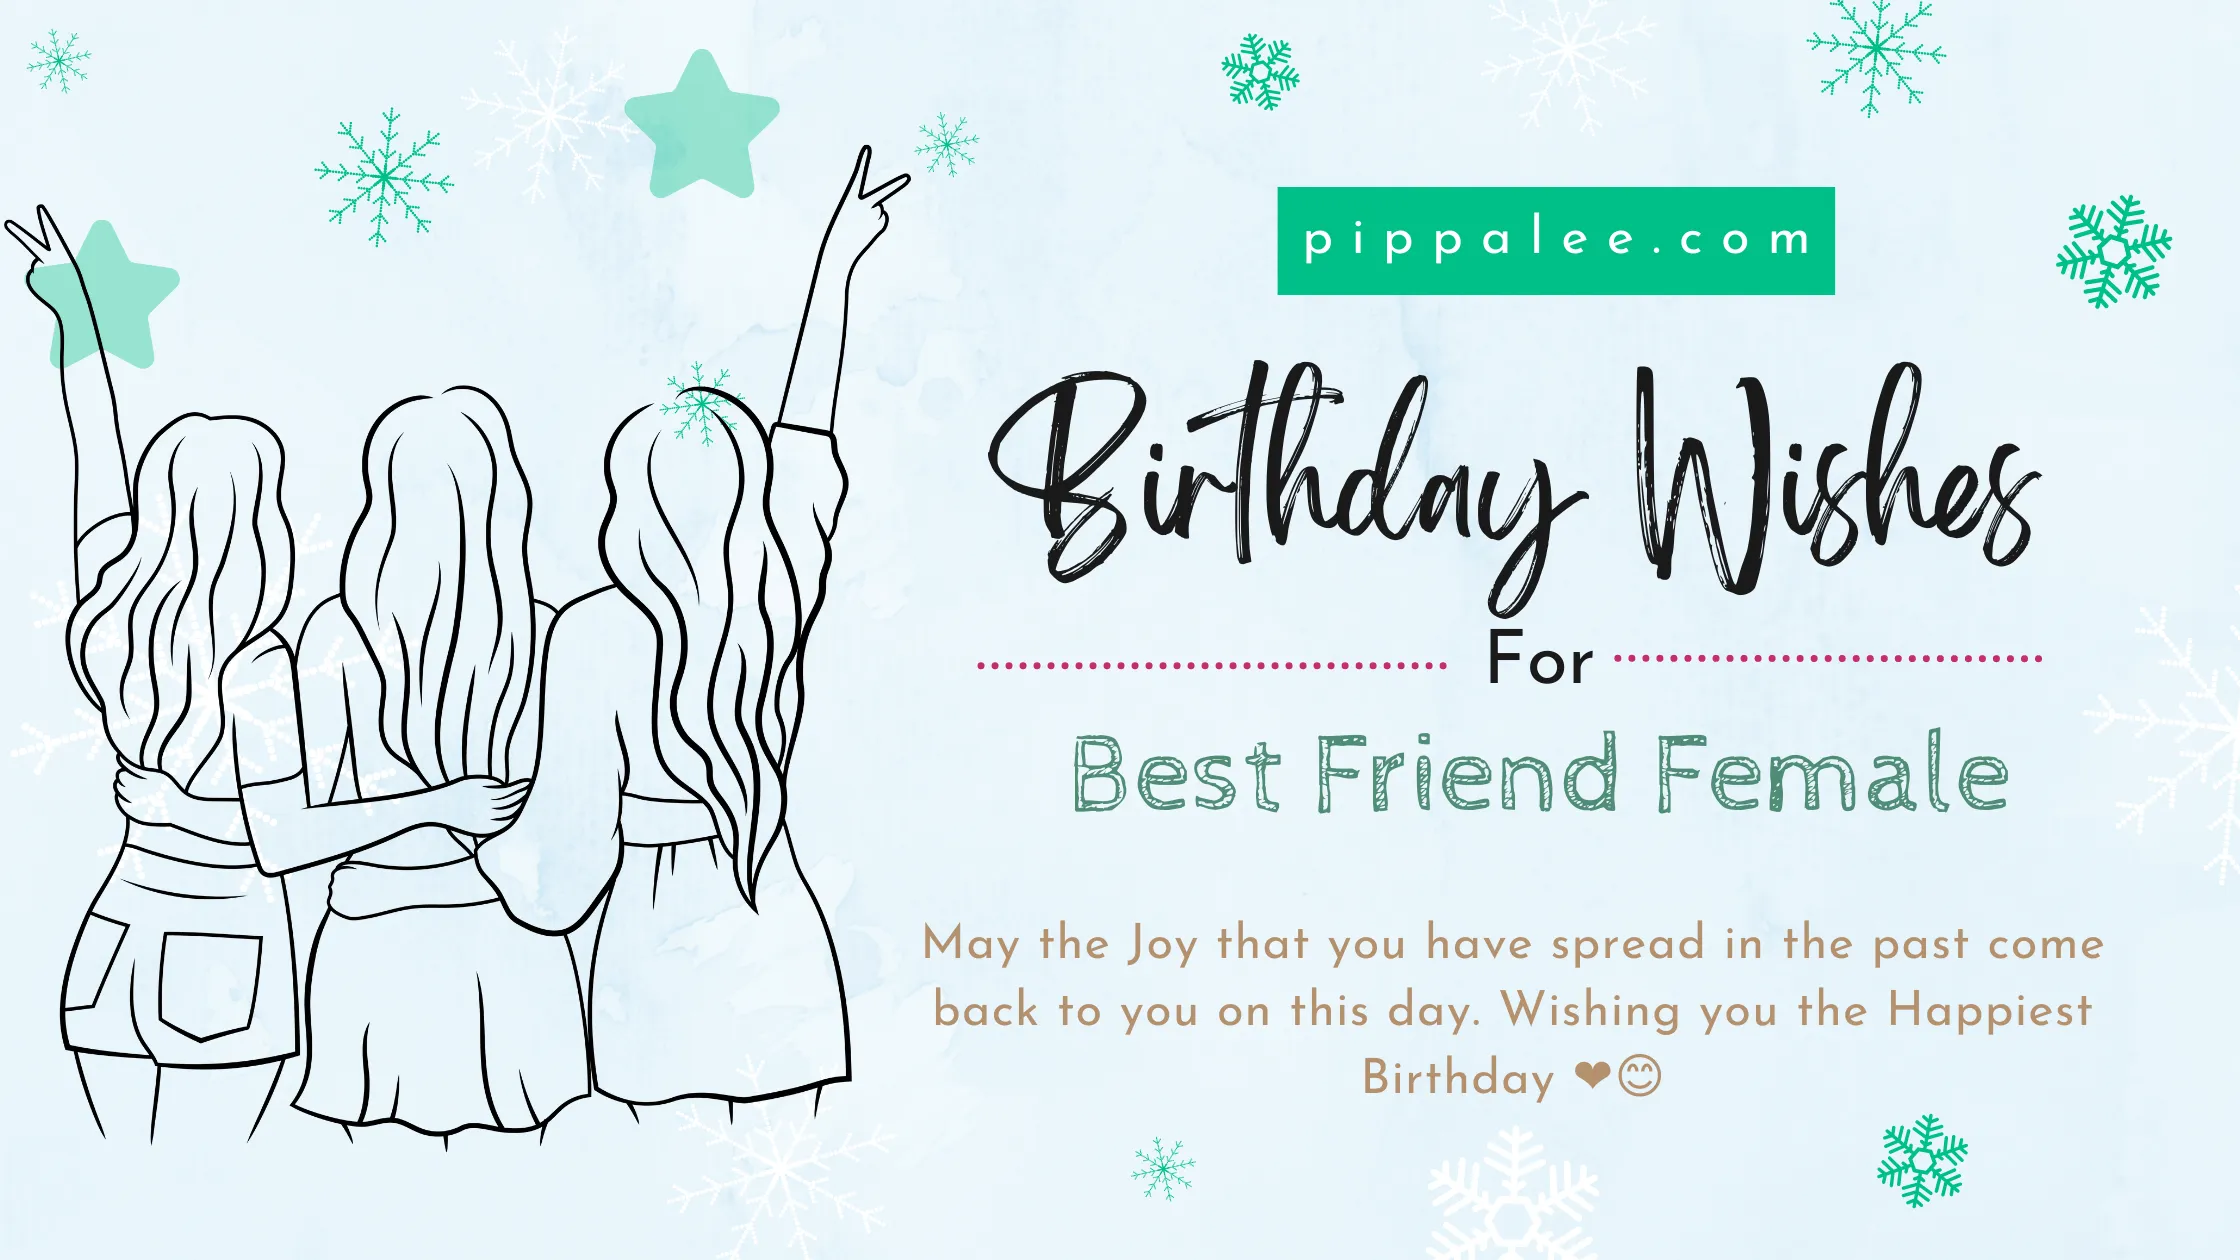 Birthday Wishes For Best Friend Female - Wishes & Messages